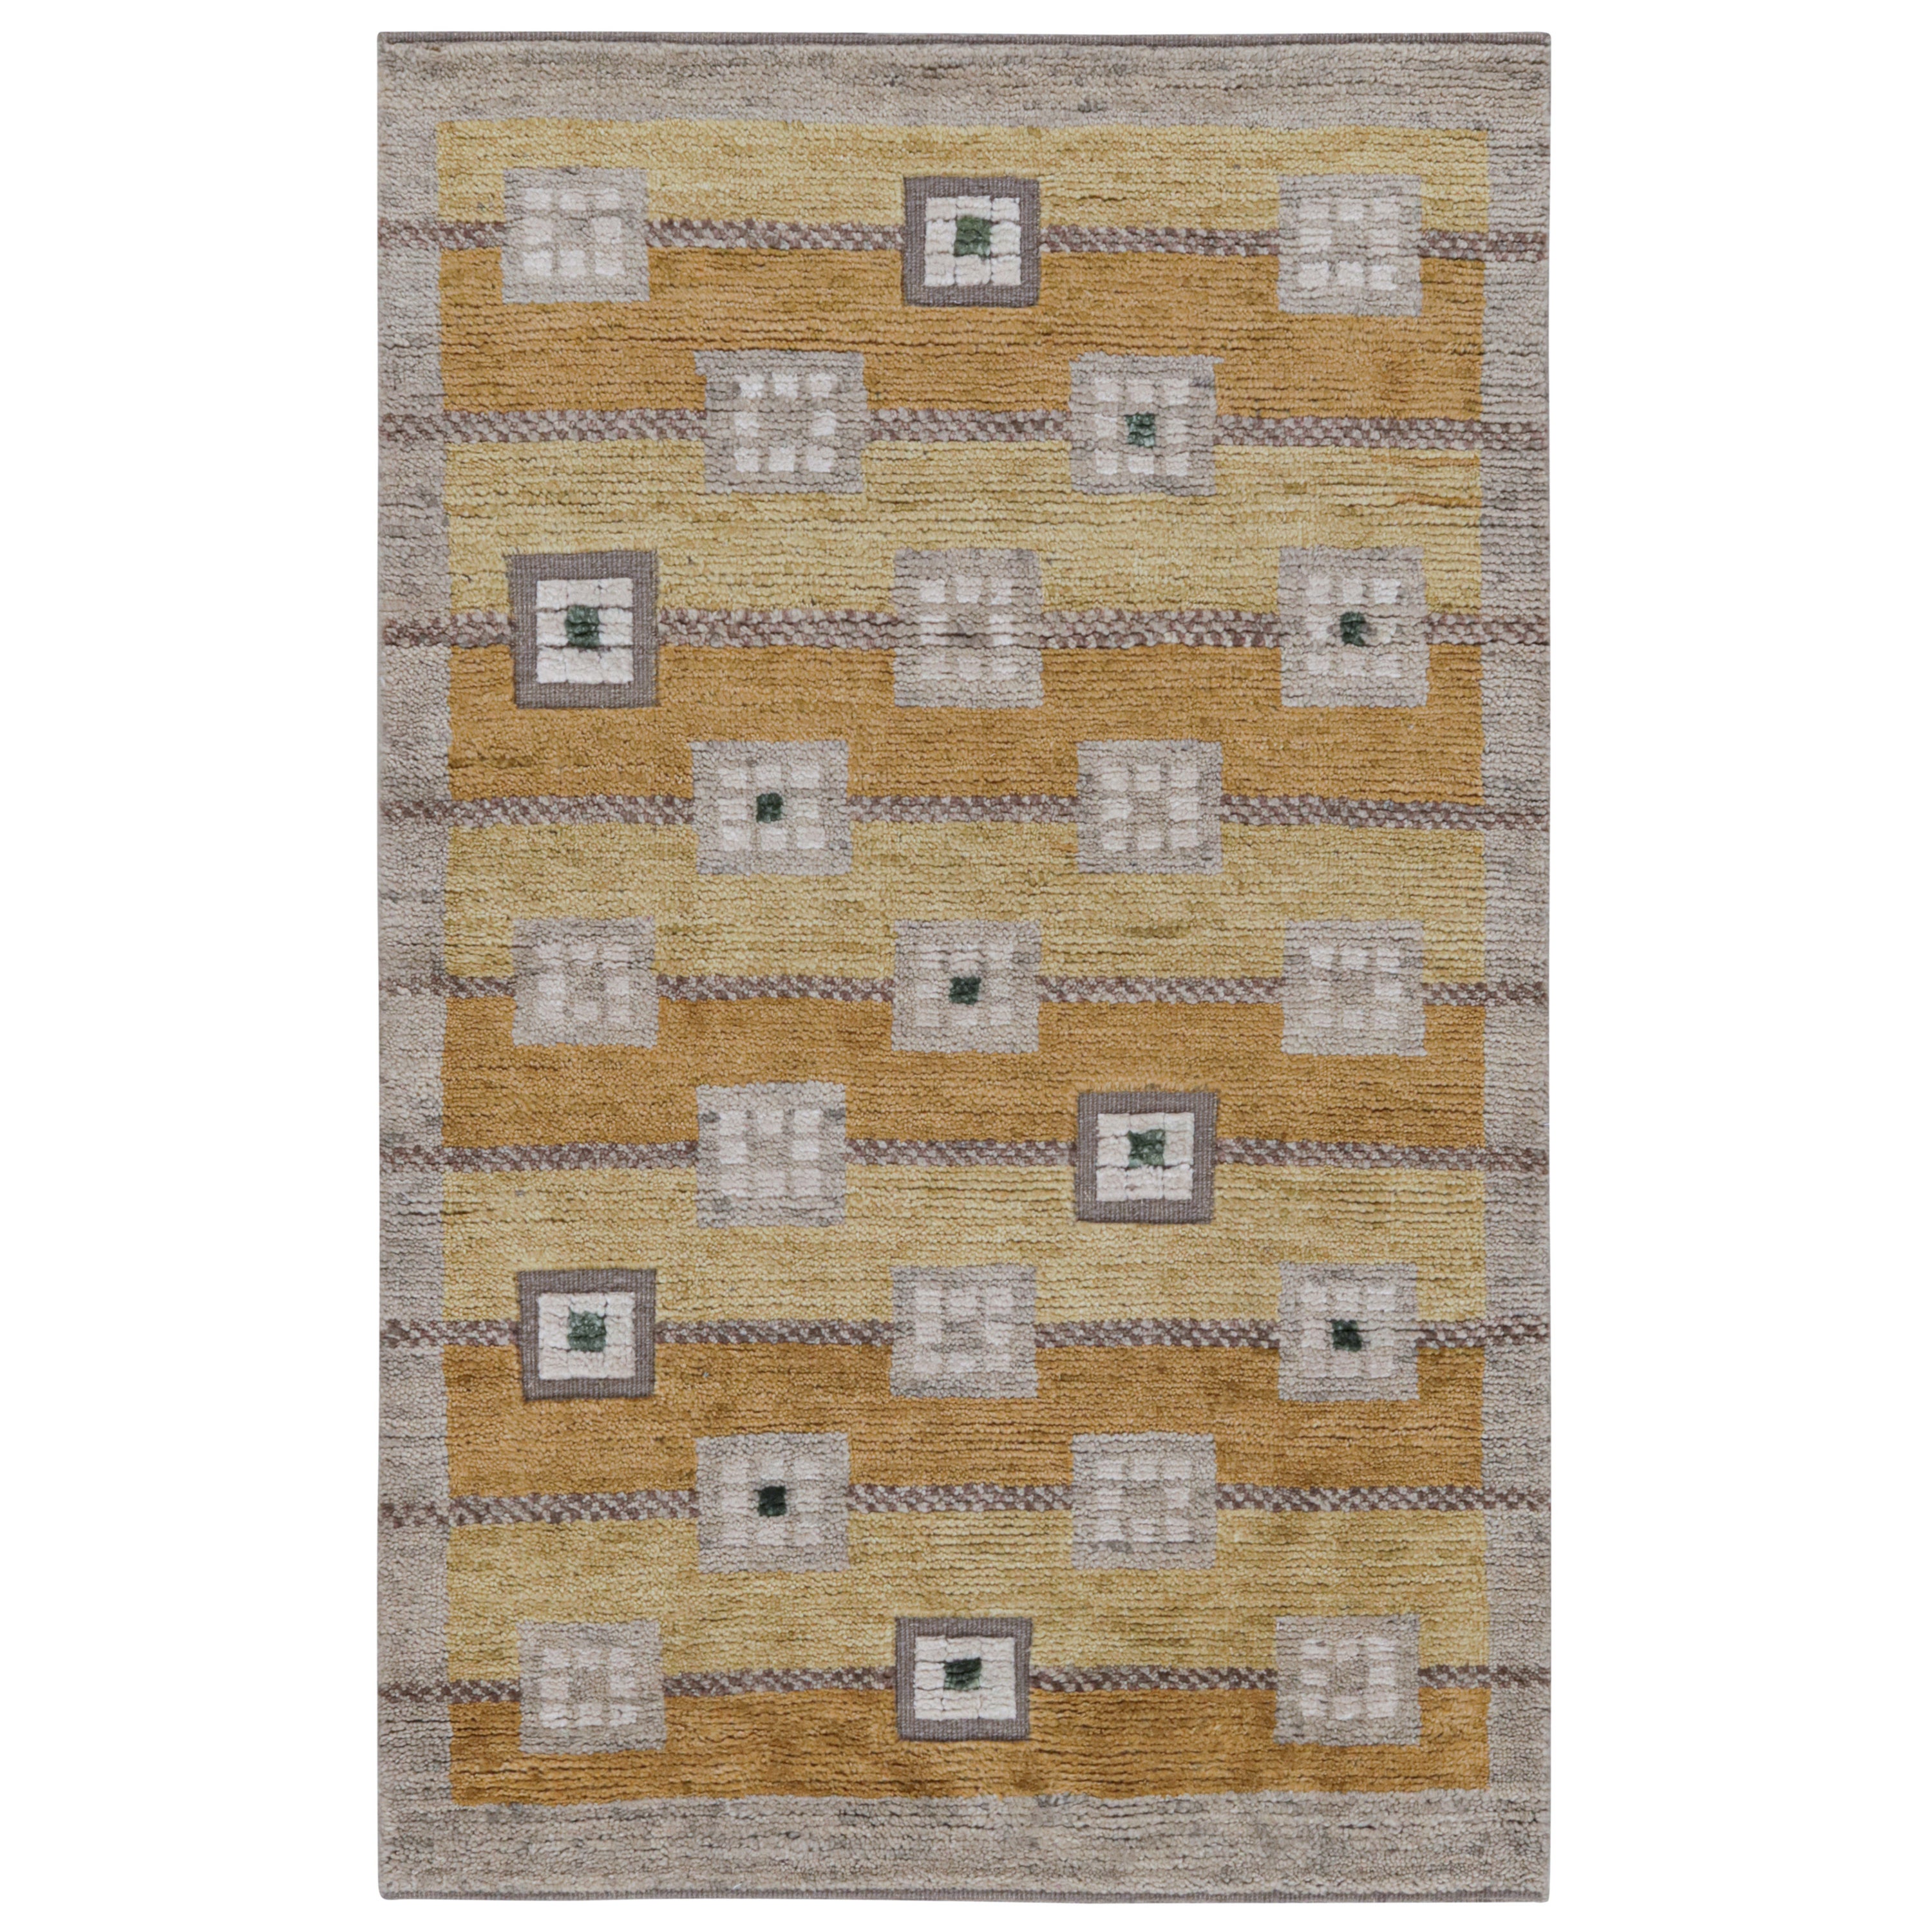 Rug & Kilim’s Scandinavian Style Rug in Gold, Brown & Grey Geometric Patterns For Sale